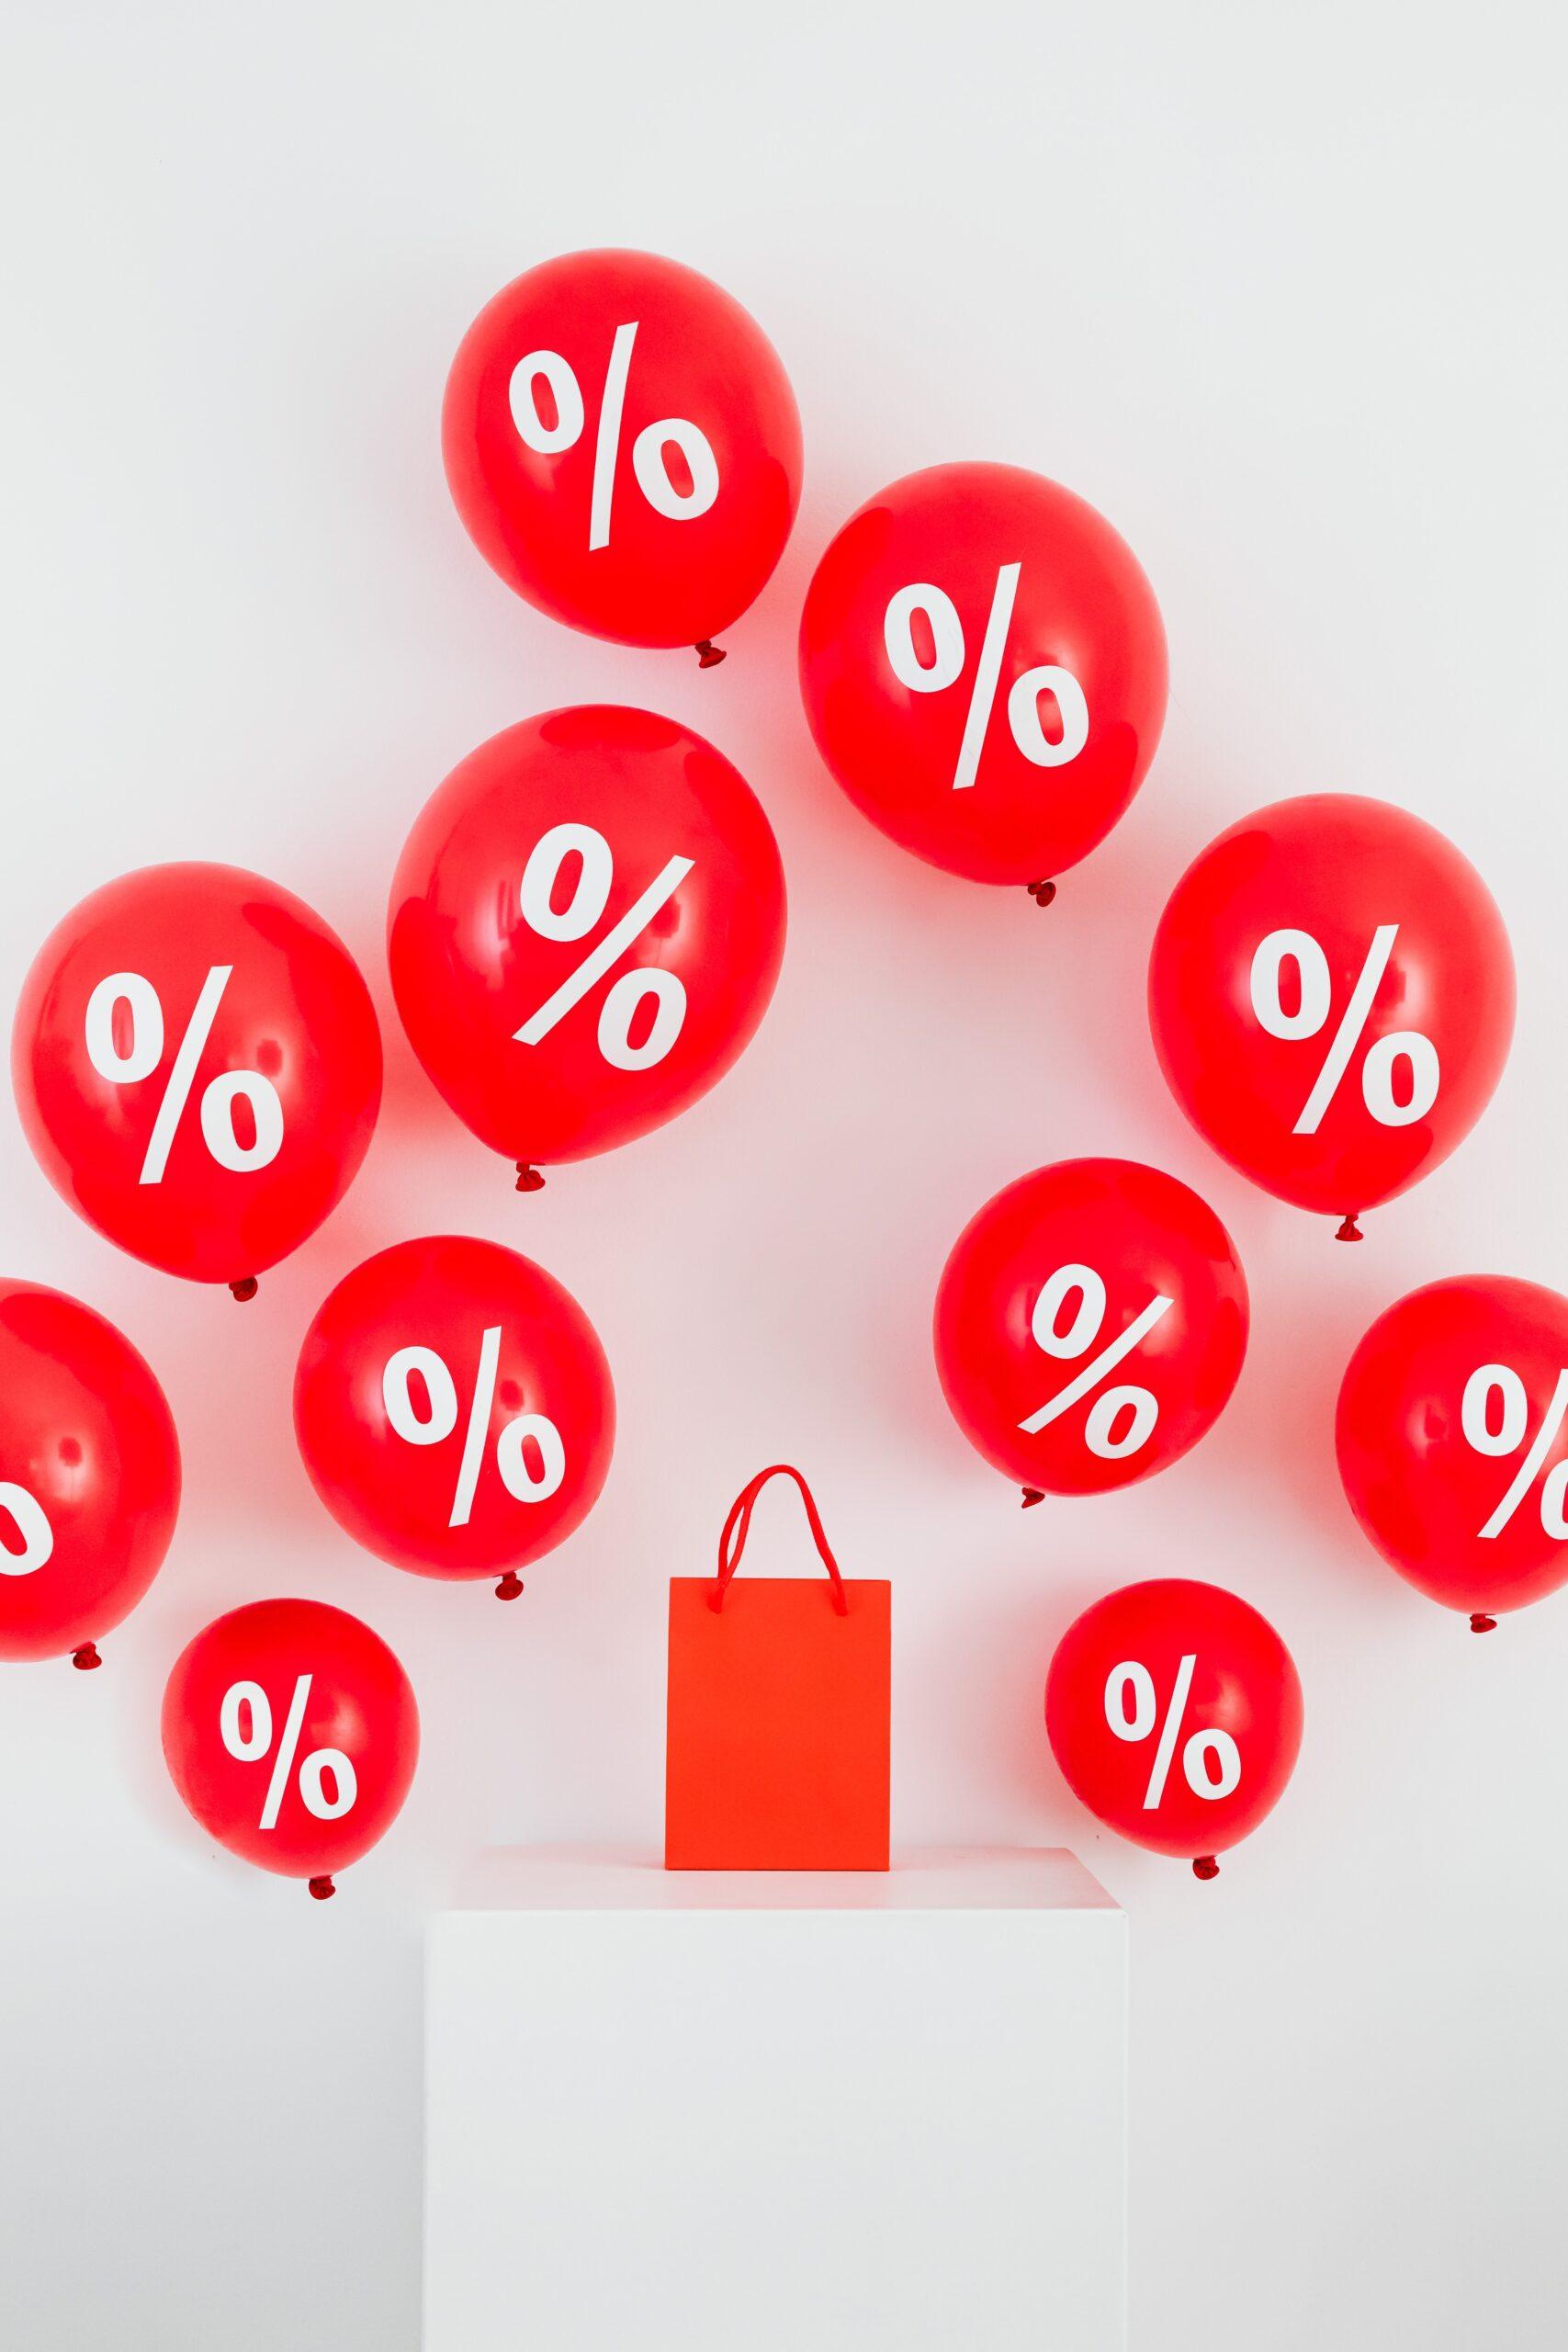 How To Distinguish Between Category Sales and Brand Sales